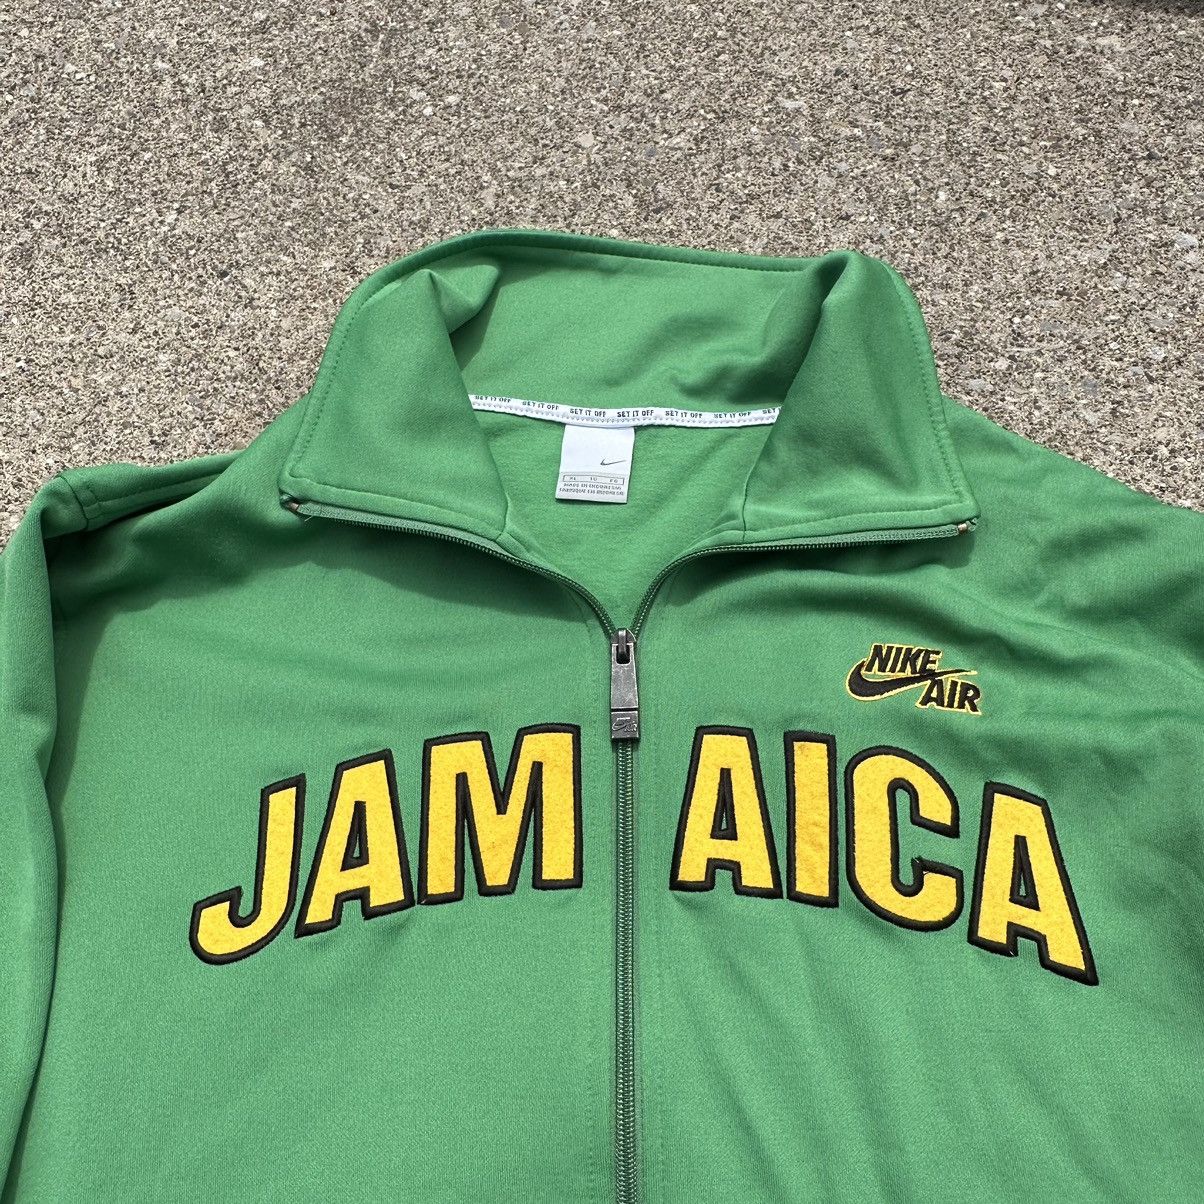 Nike Vintage Nike Air Jamaica zip up Size US XL / EU 56 / 4 - 2 Preview